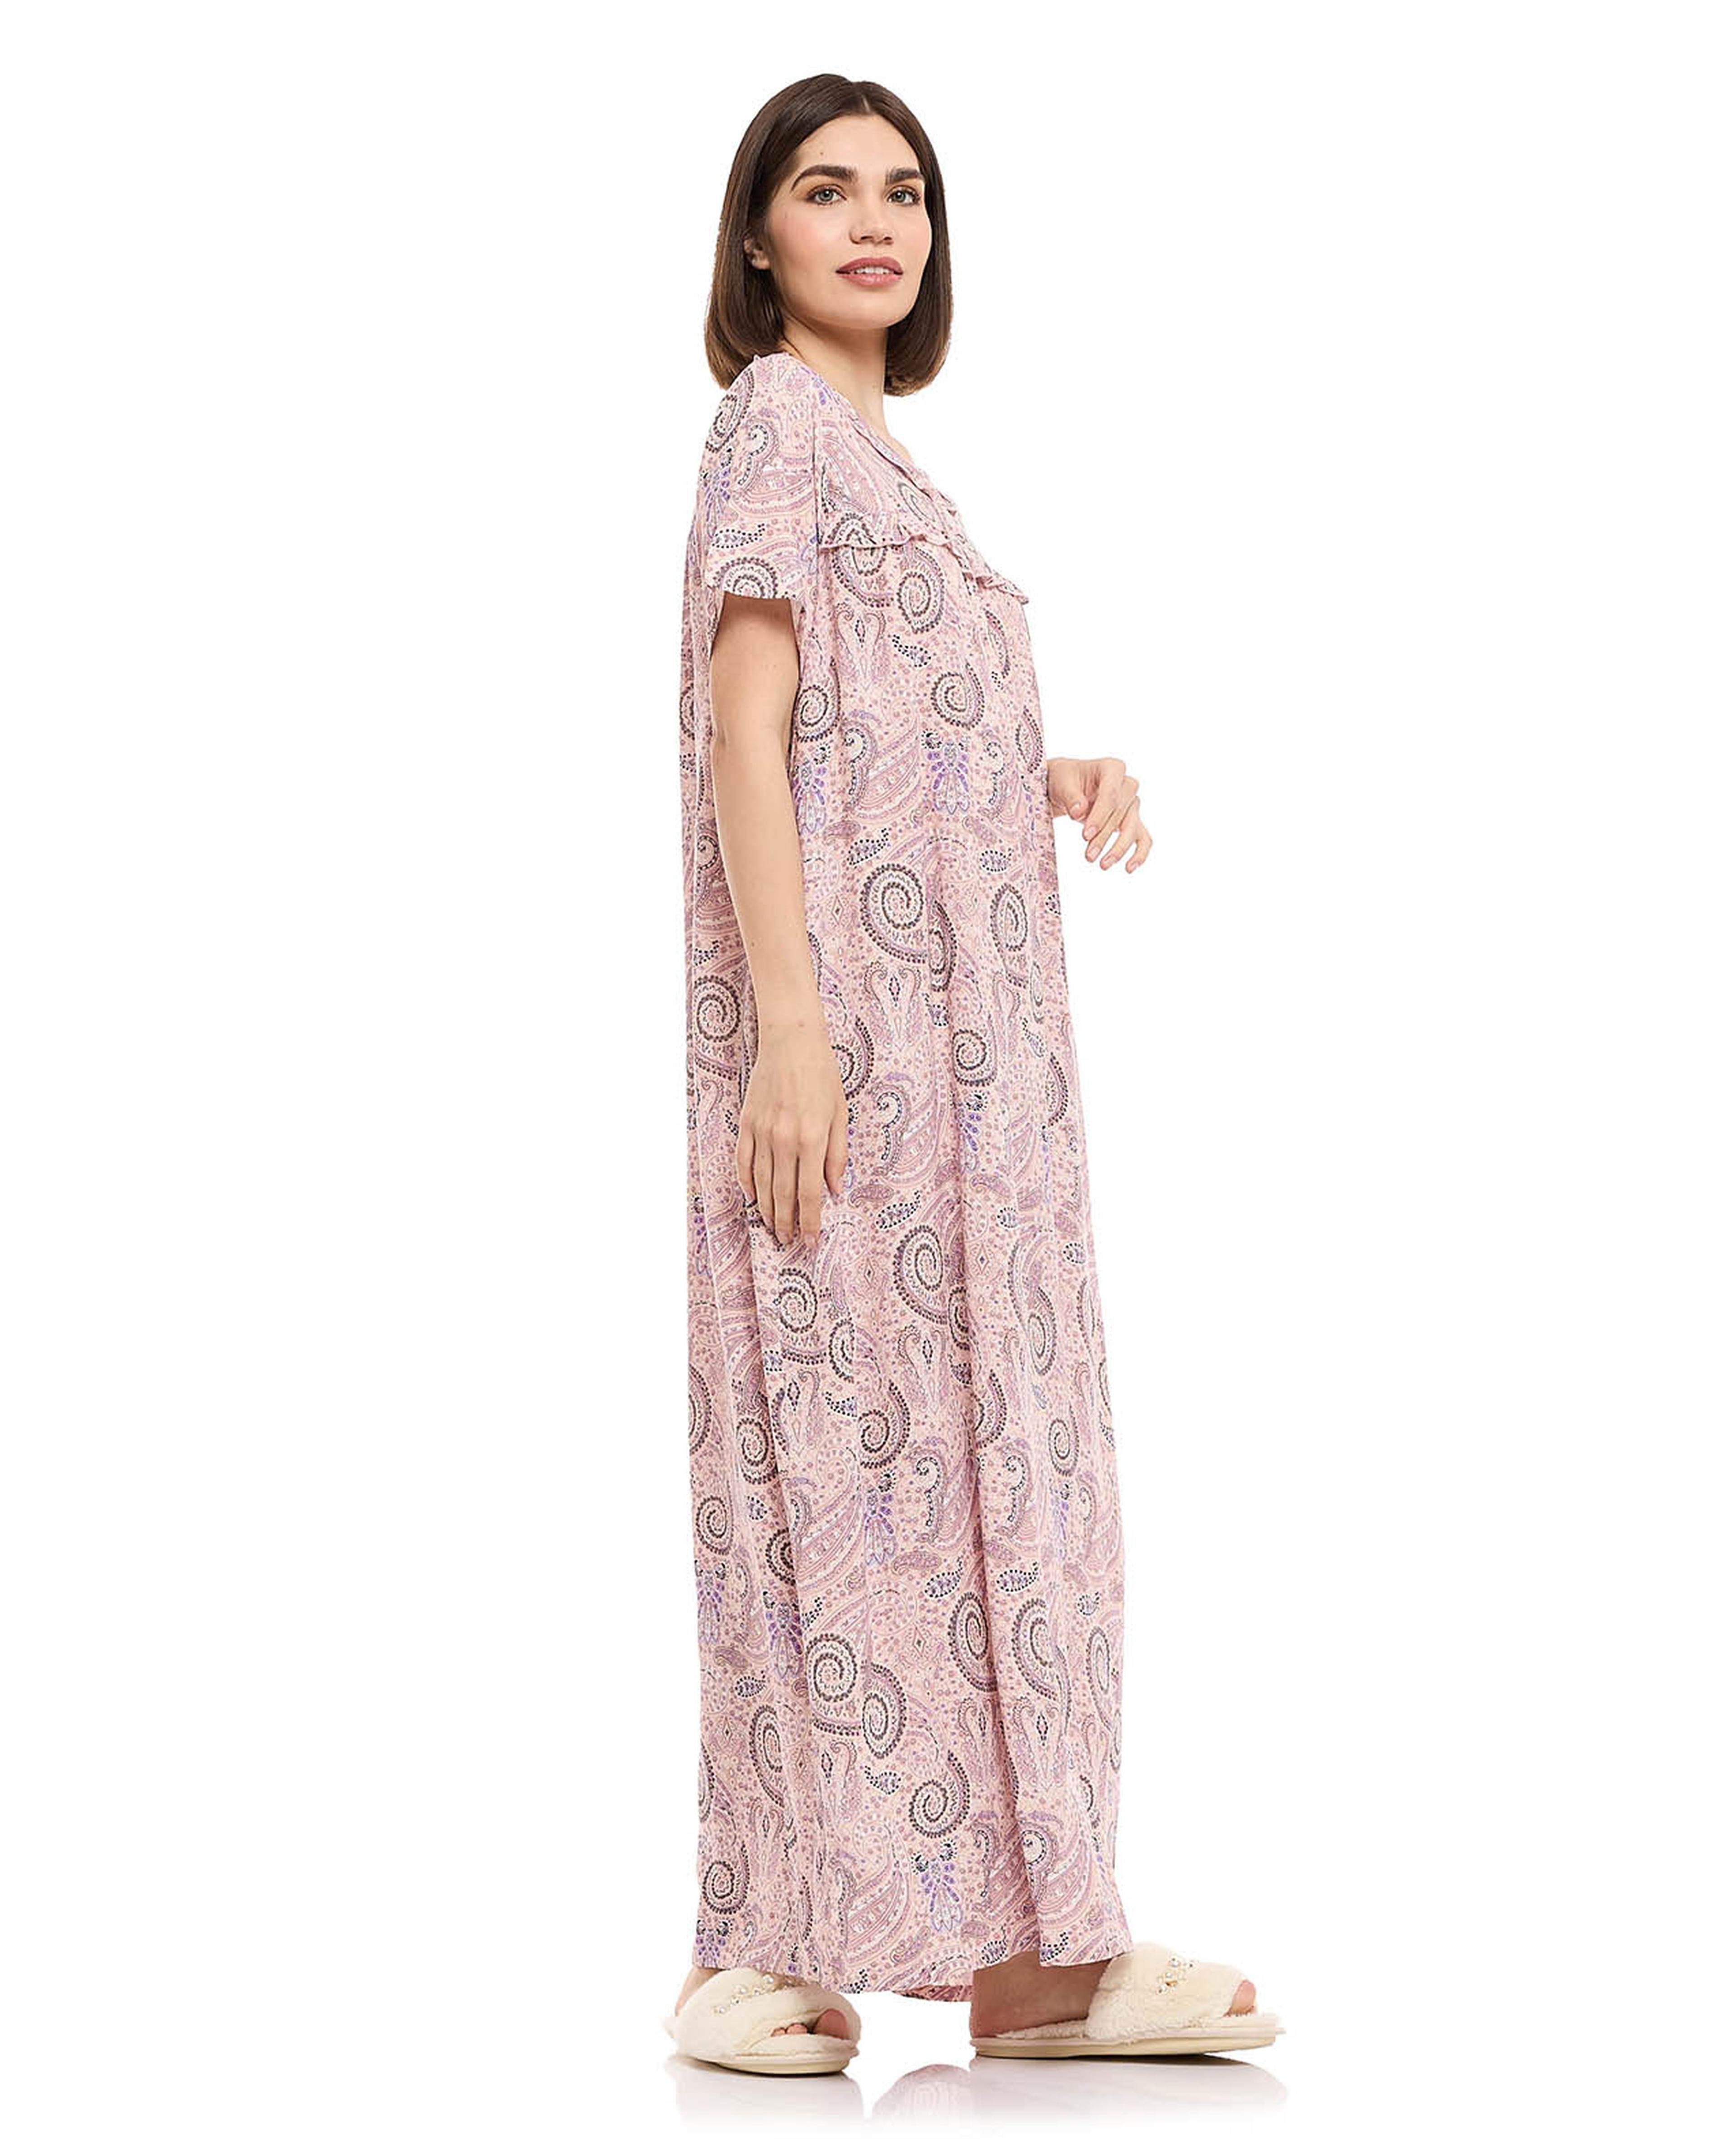 Patterned Night Gown with Short Sleeves